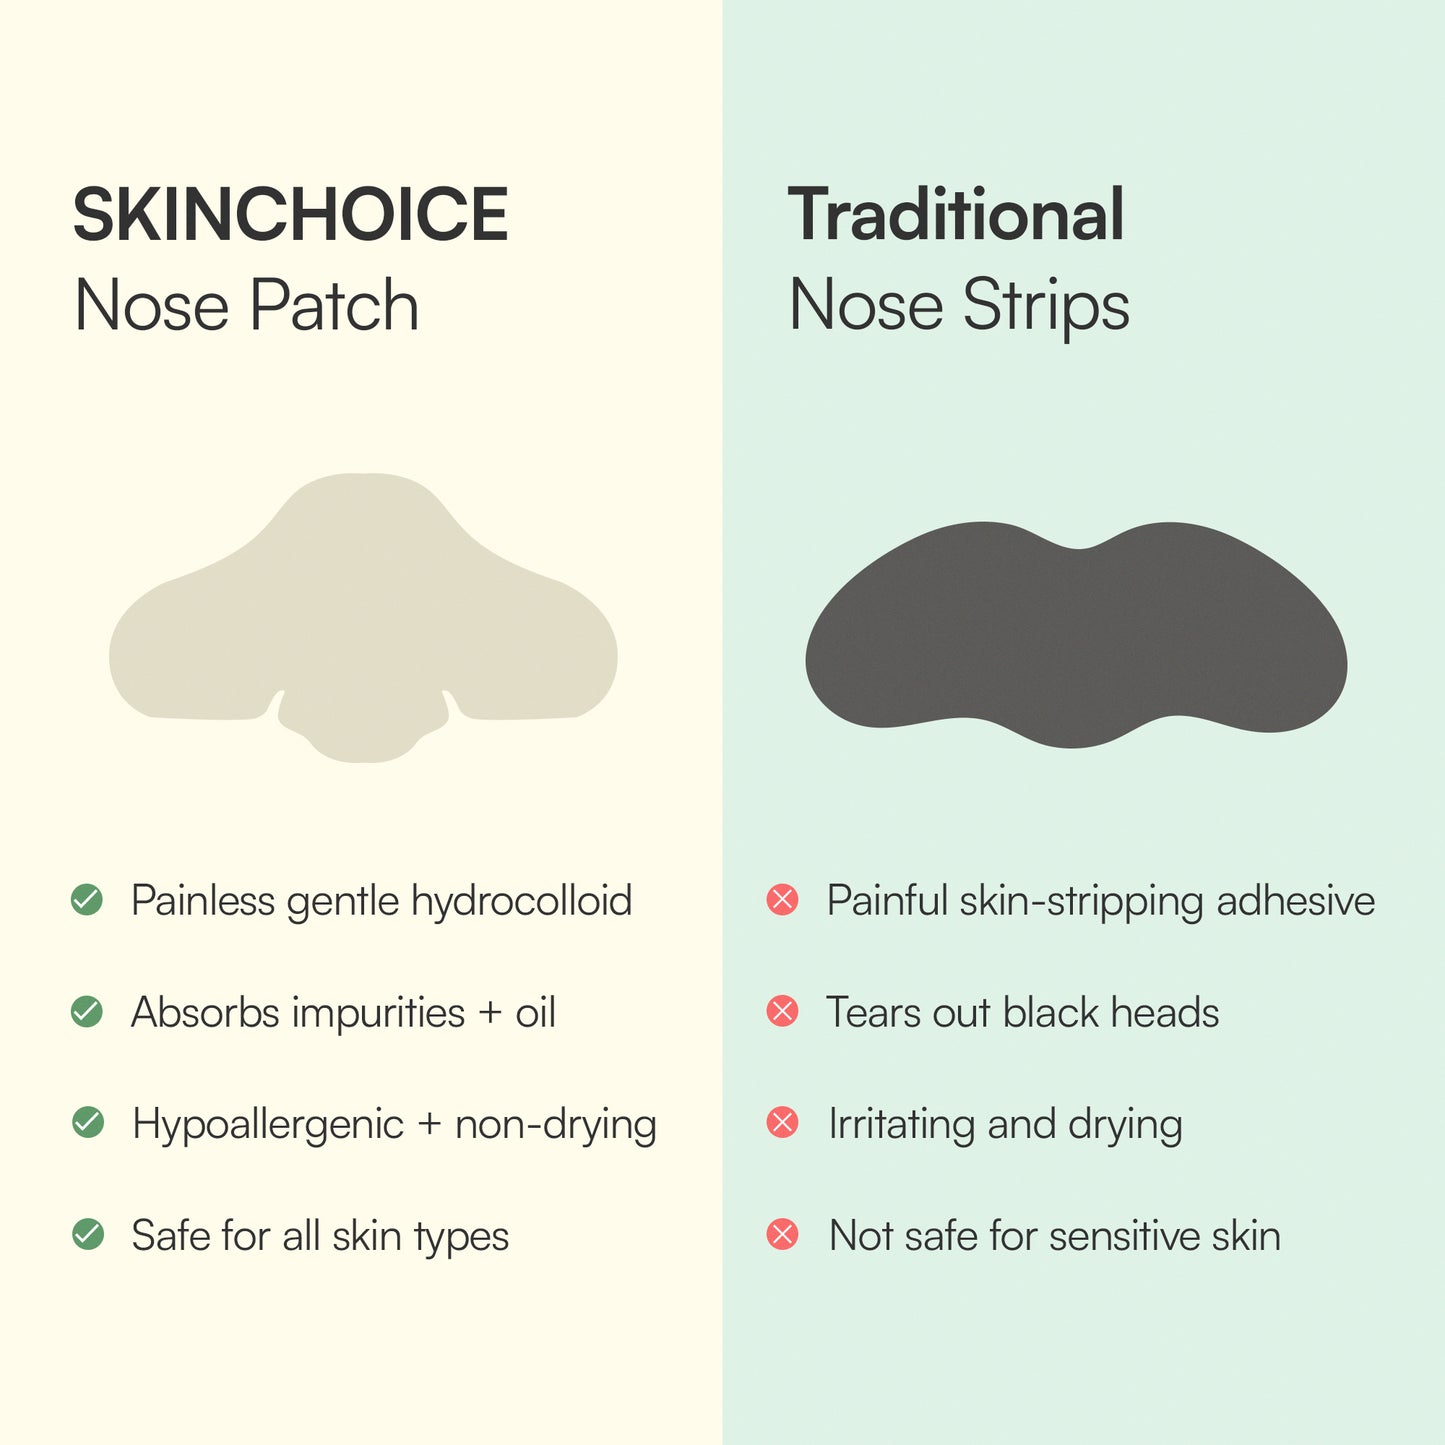 Skinchoice Nose Patch